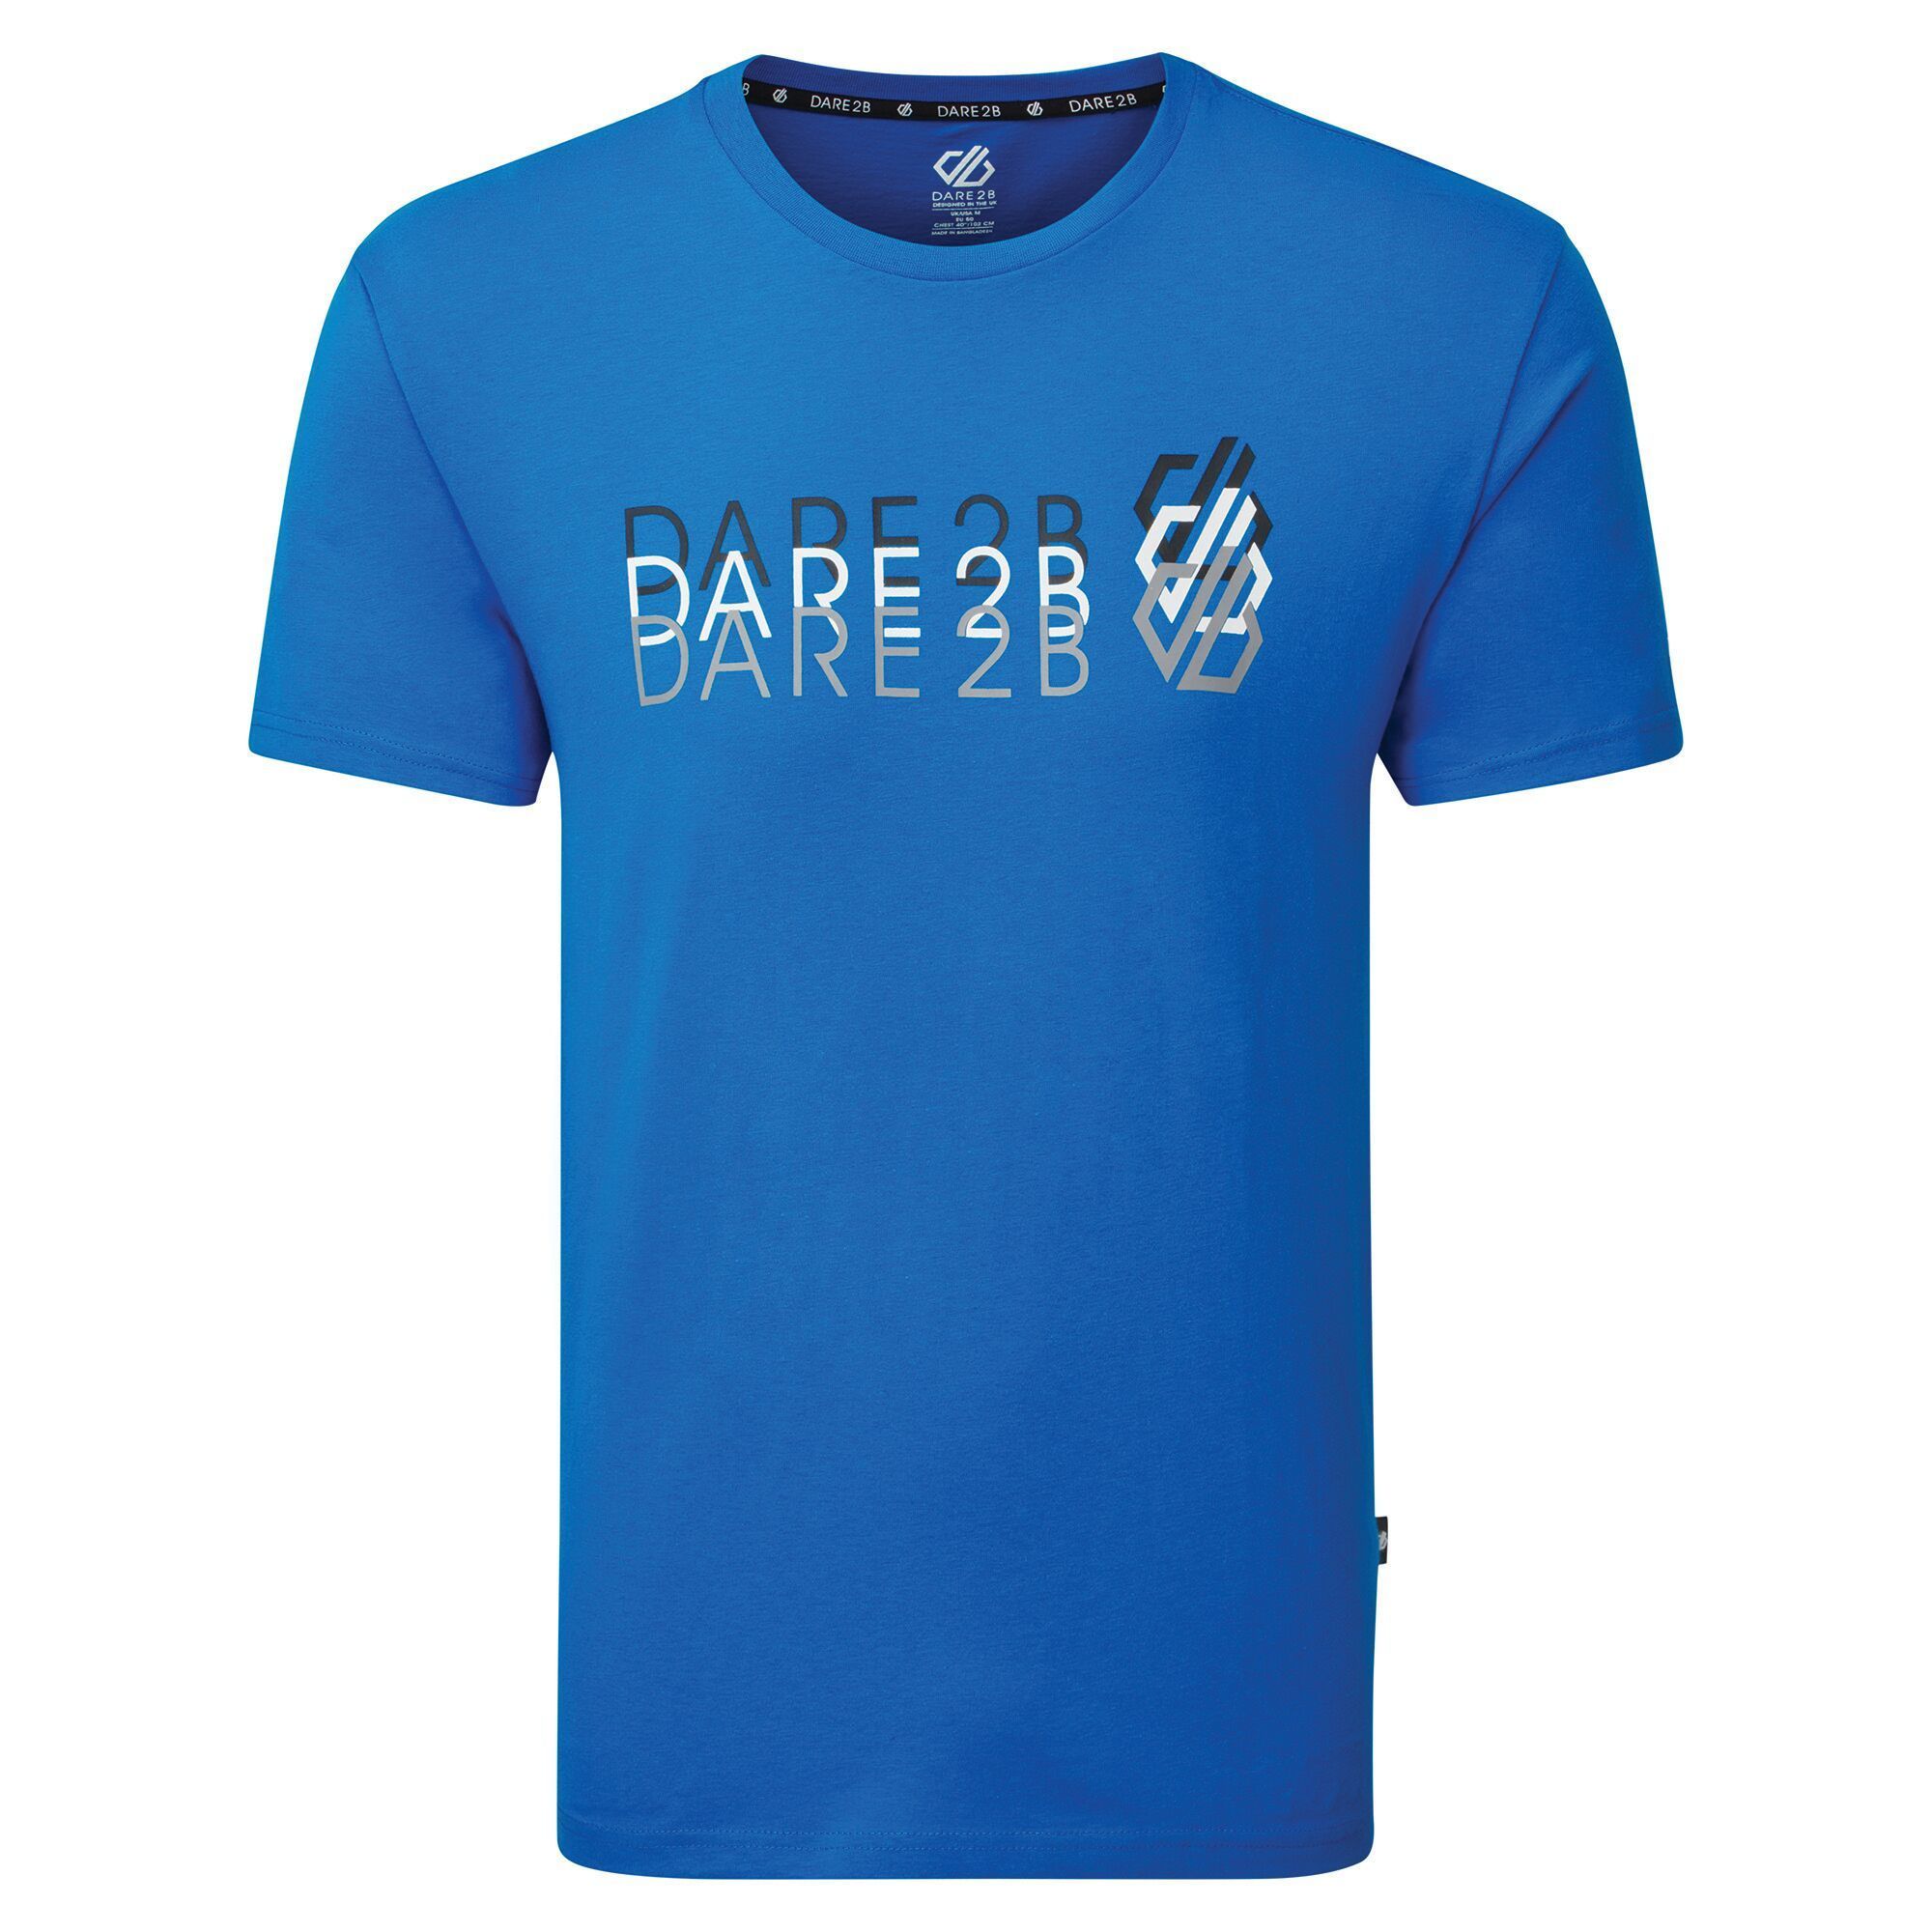 Material: 100% Cotton. Soft jersey fabric. Short sleeved with ribbed collar and round neck. Features 2 colour toned Dare 2B logo graphic print on the front.